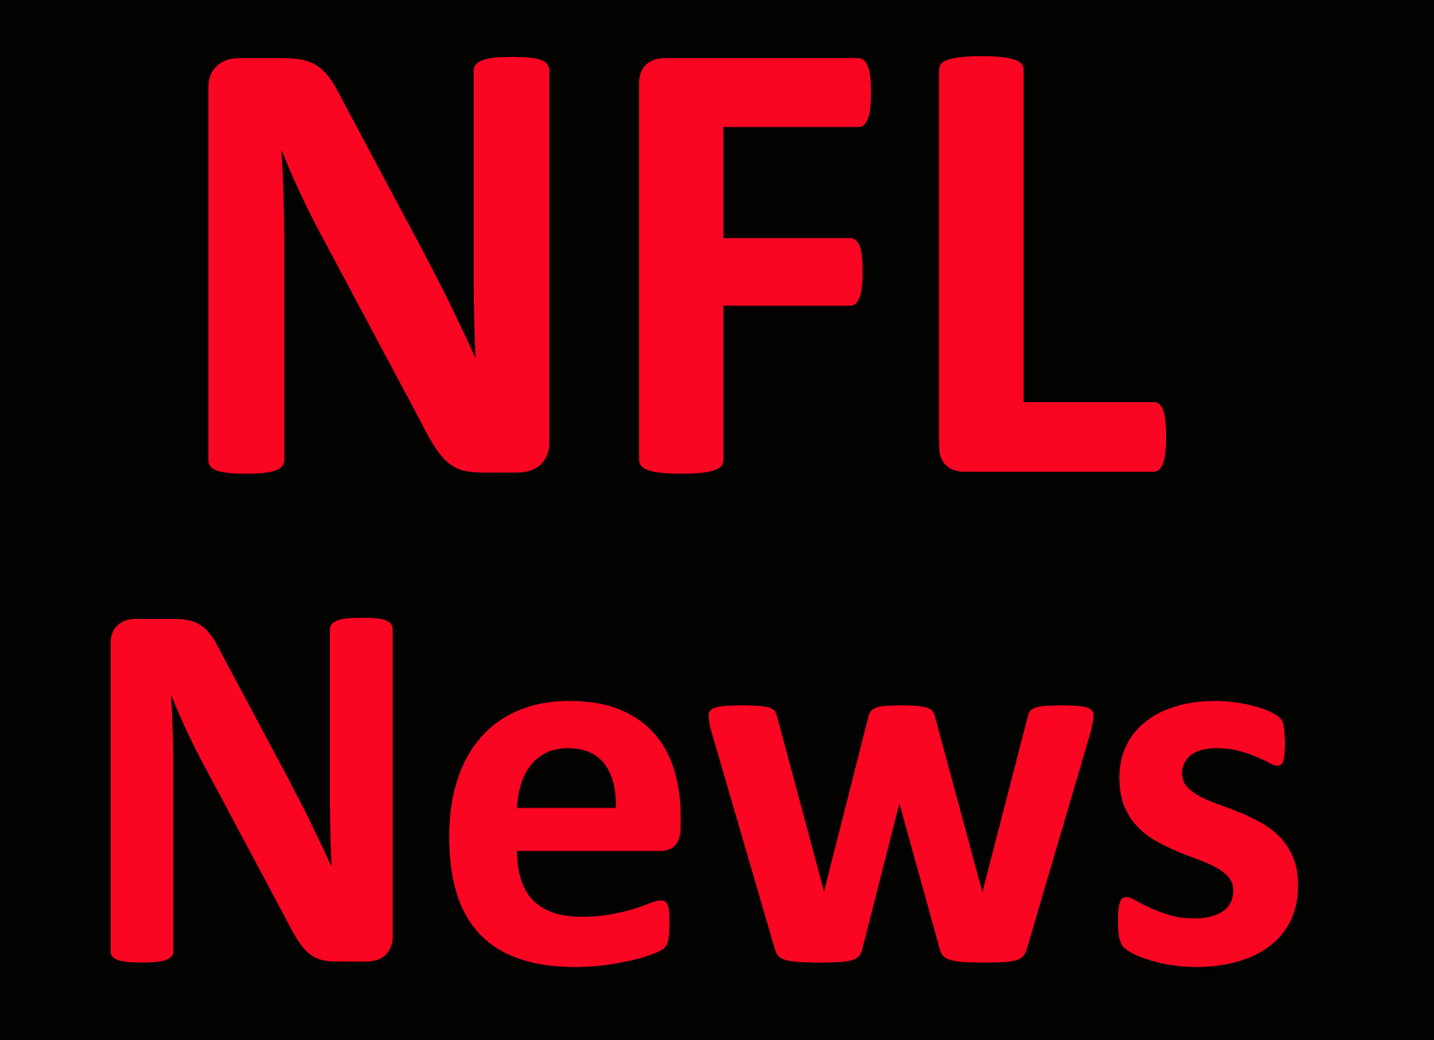 NFL News: The key questions shaping the future of the NFL in Europe Per Report